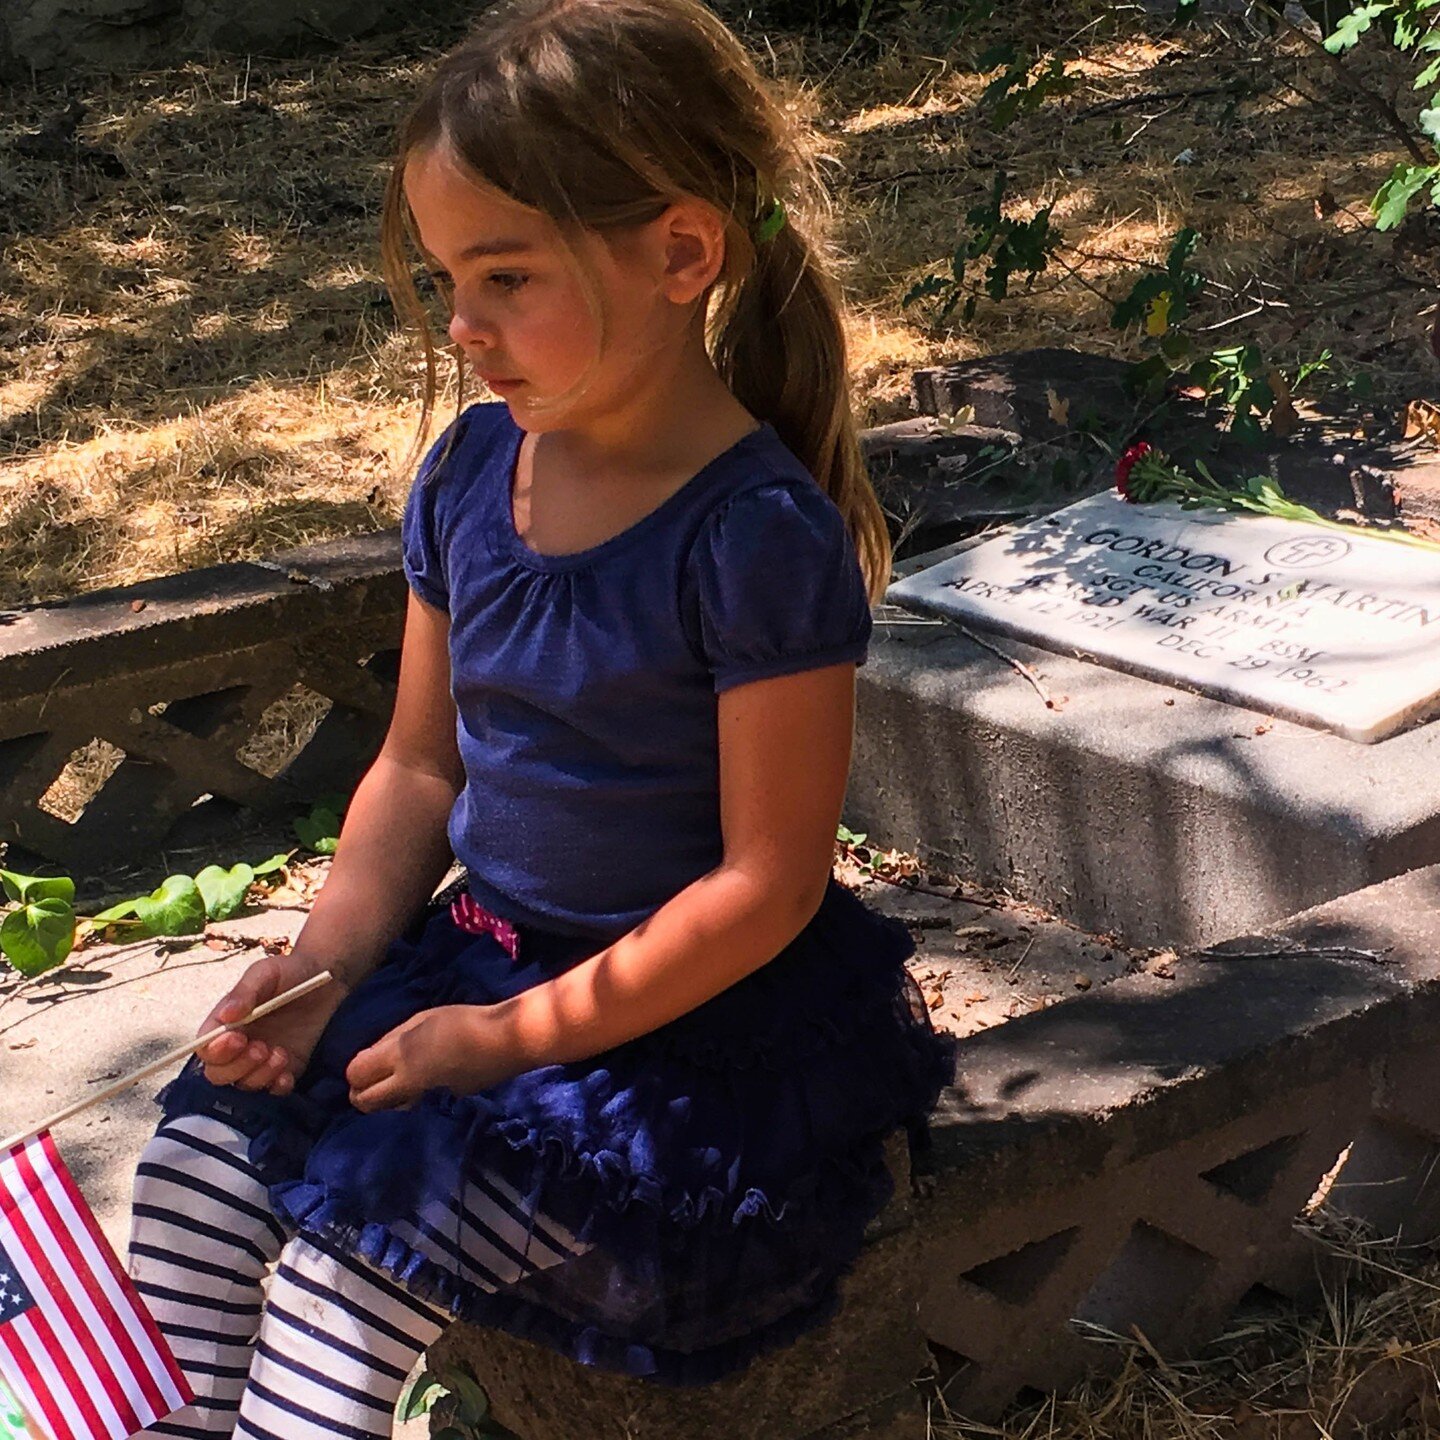 On Memorial Day, we pay tribute to the families who have paid the ultimate price, and our hearts swell with gratitude for the valiant men and women who have died serving our country. I would like to share these photos from years ago when my girls wer